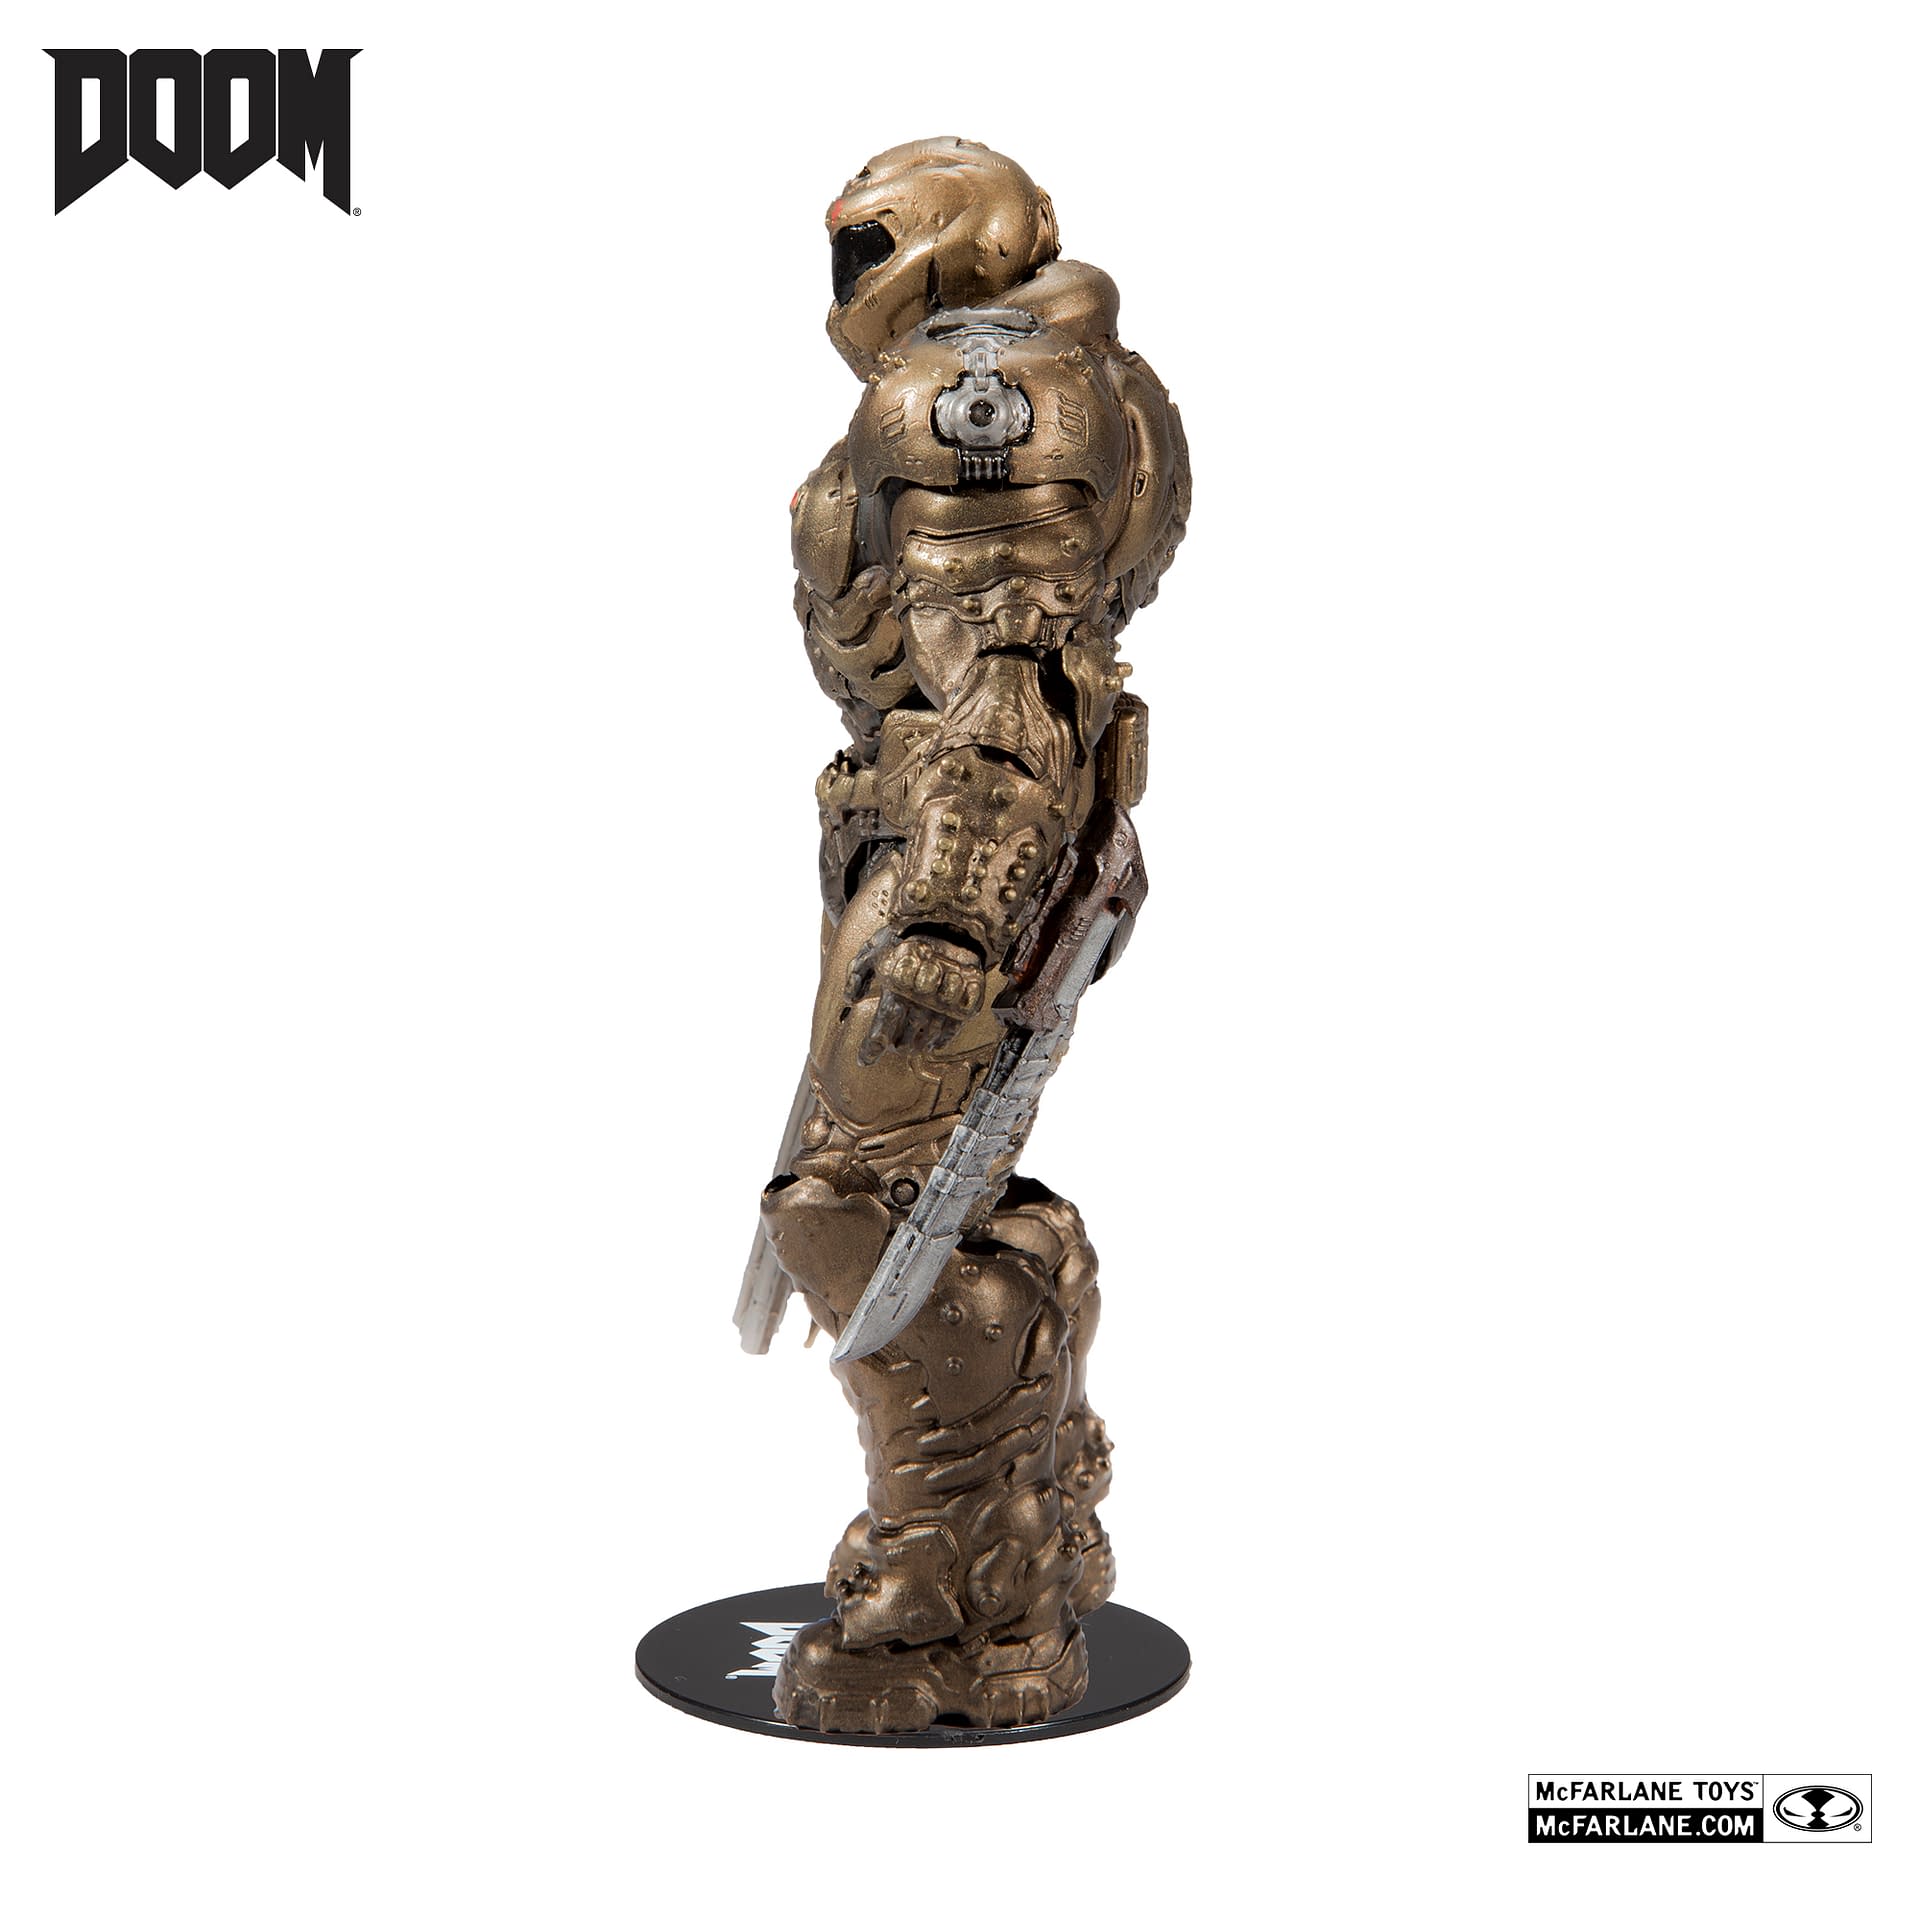 Doom Guy Gets an Exclusive Variant Figure from McFarlane Toys